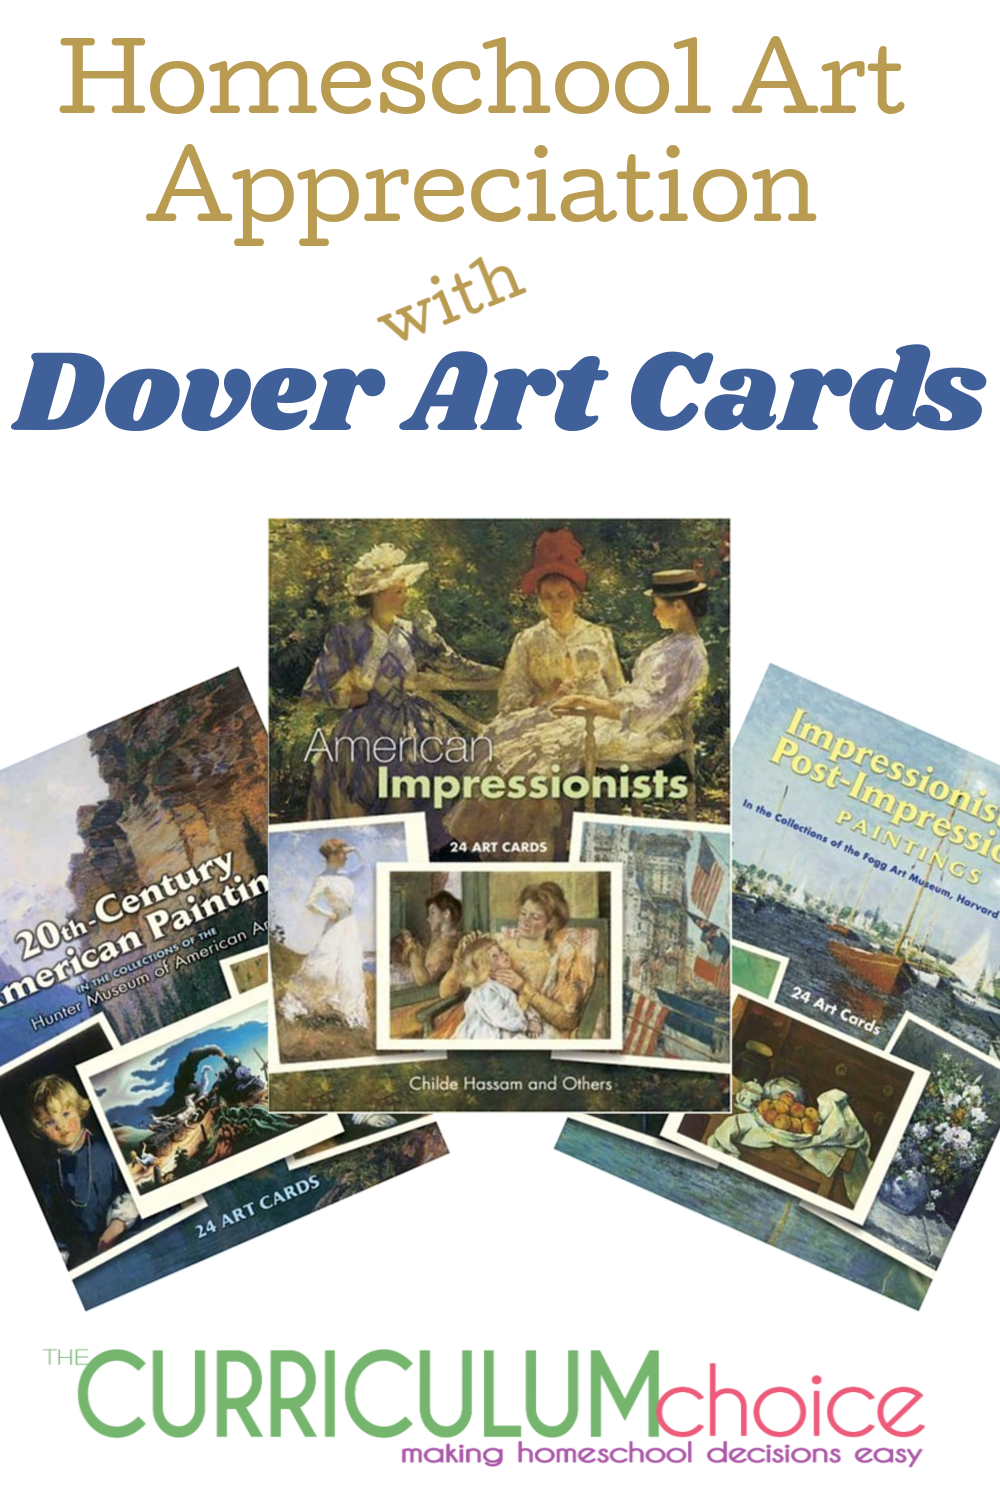 Dover Art Card Sets make homeschool art appreciation easy. Sturdy cards including the  painting along with basic information about the art including the artist, title, year of production and art medium used to create the work. A review from The Curriculum Choice